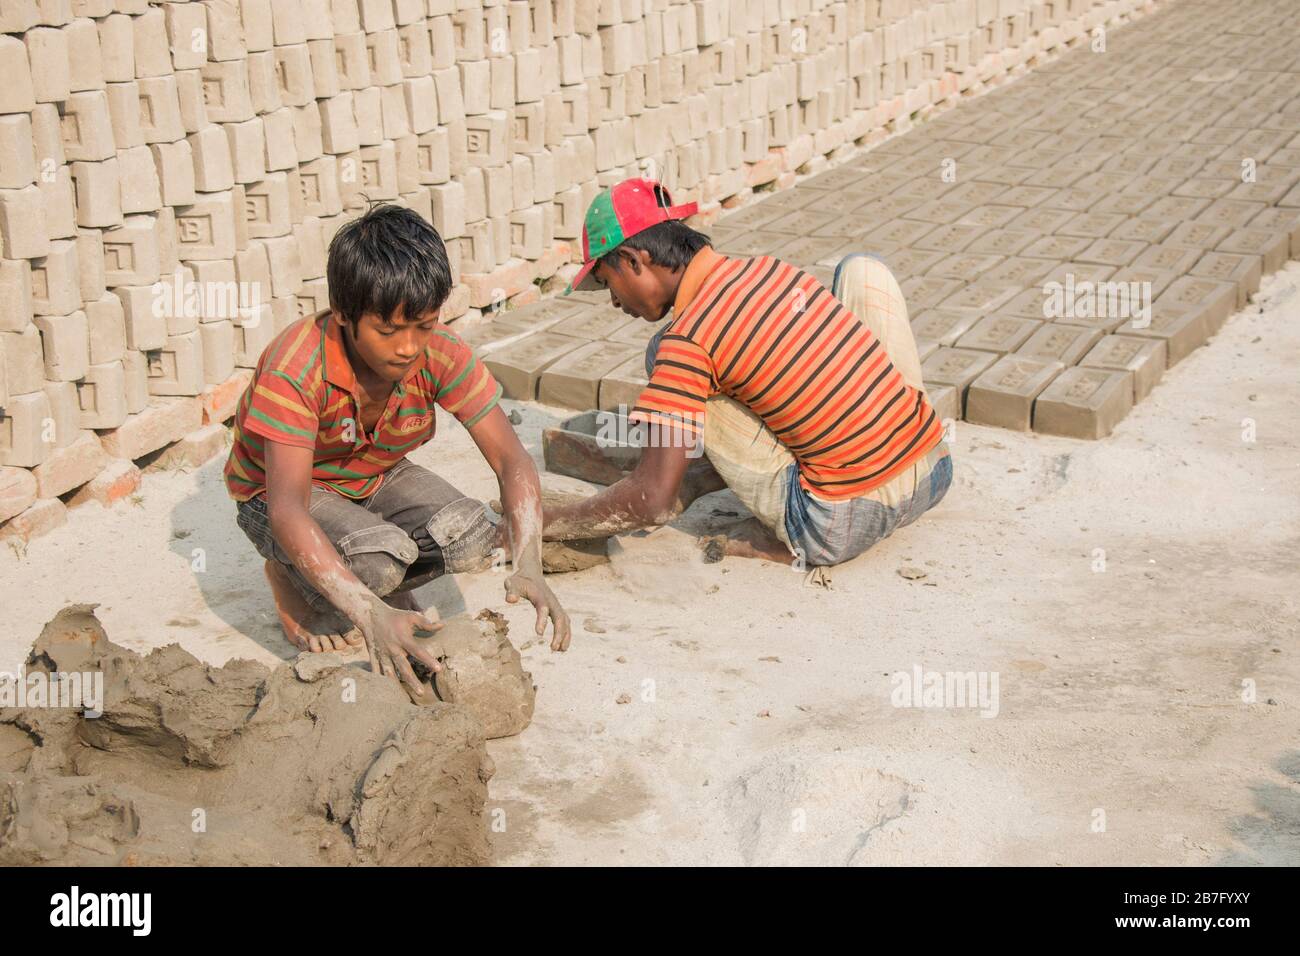 A Bangladesh child labor is working in a brick filed under a sunny day. Though child labor is restricted in this industry but he is working for food. Stock Photo